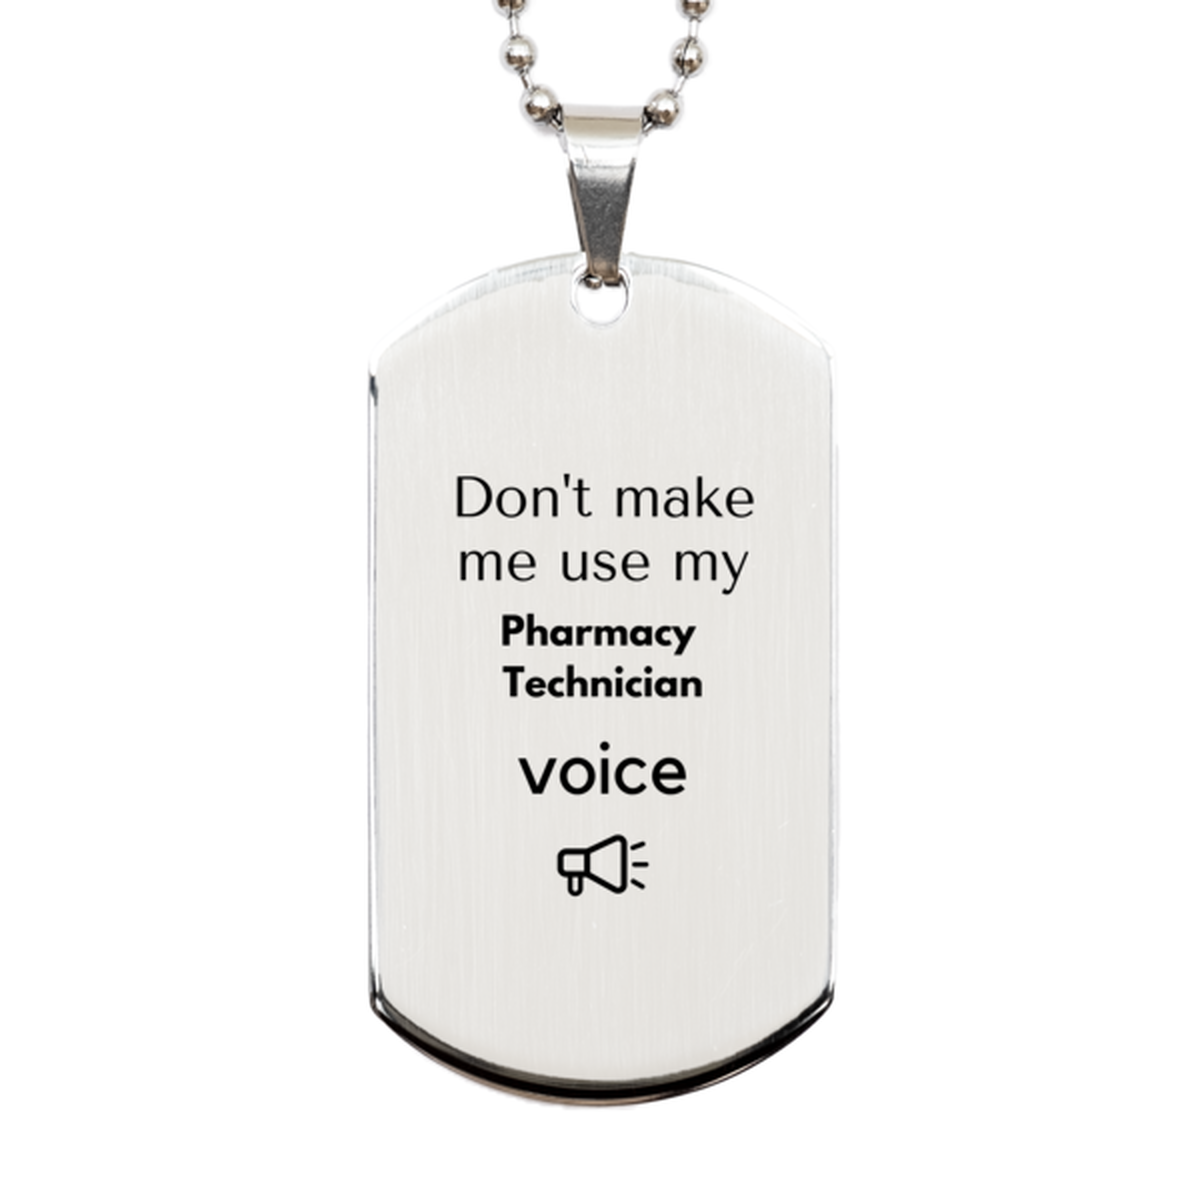 Don't make me use my Pharmacy Technician voice, Sarcasm Pharmacy Technician Gifts, Christmas Pharmacy Technician Silver Dog Tag Birthday Unique Gifts For Pharmacy Technician Coworkers, Men, Women, Colleague, Friends